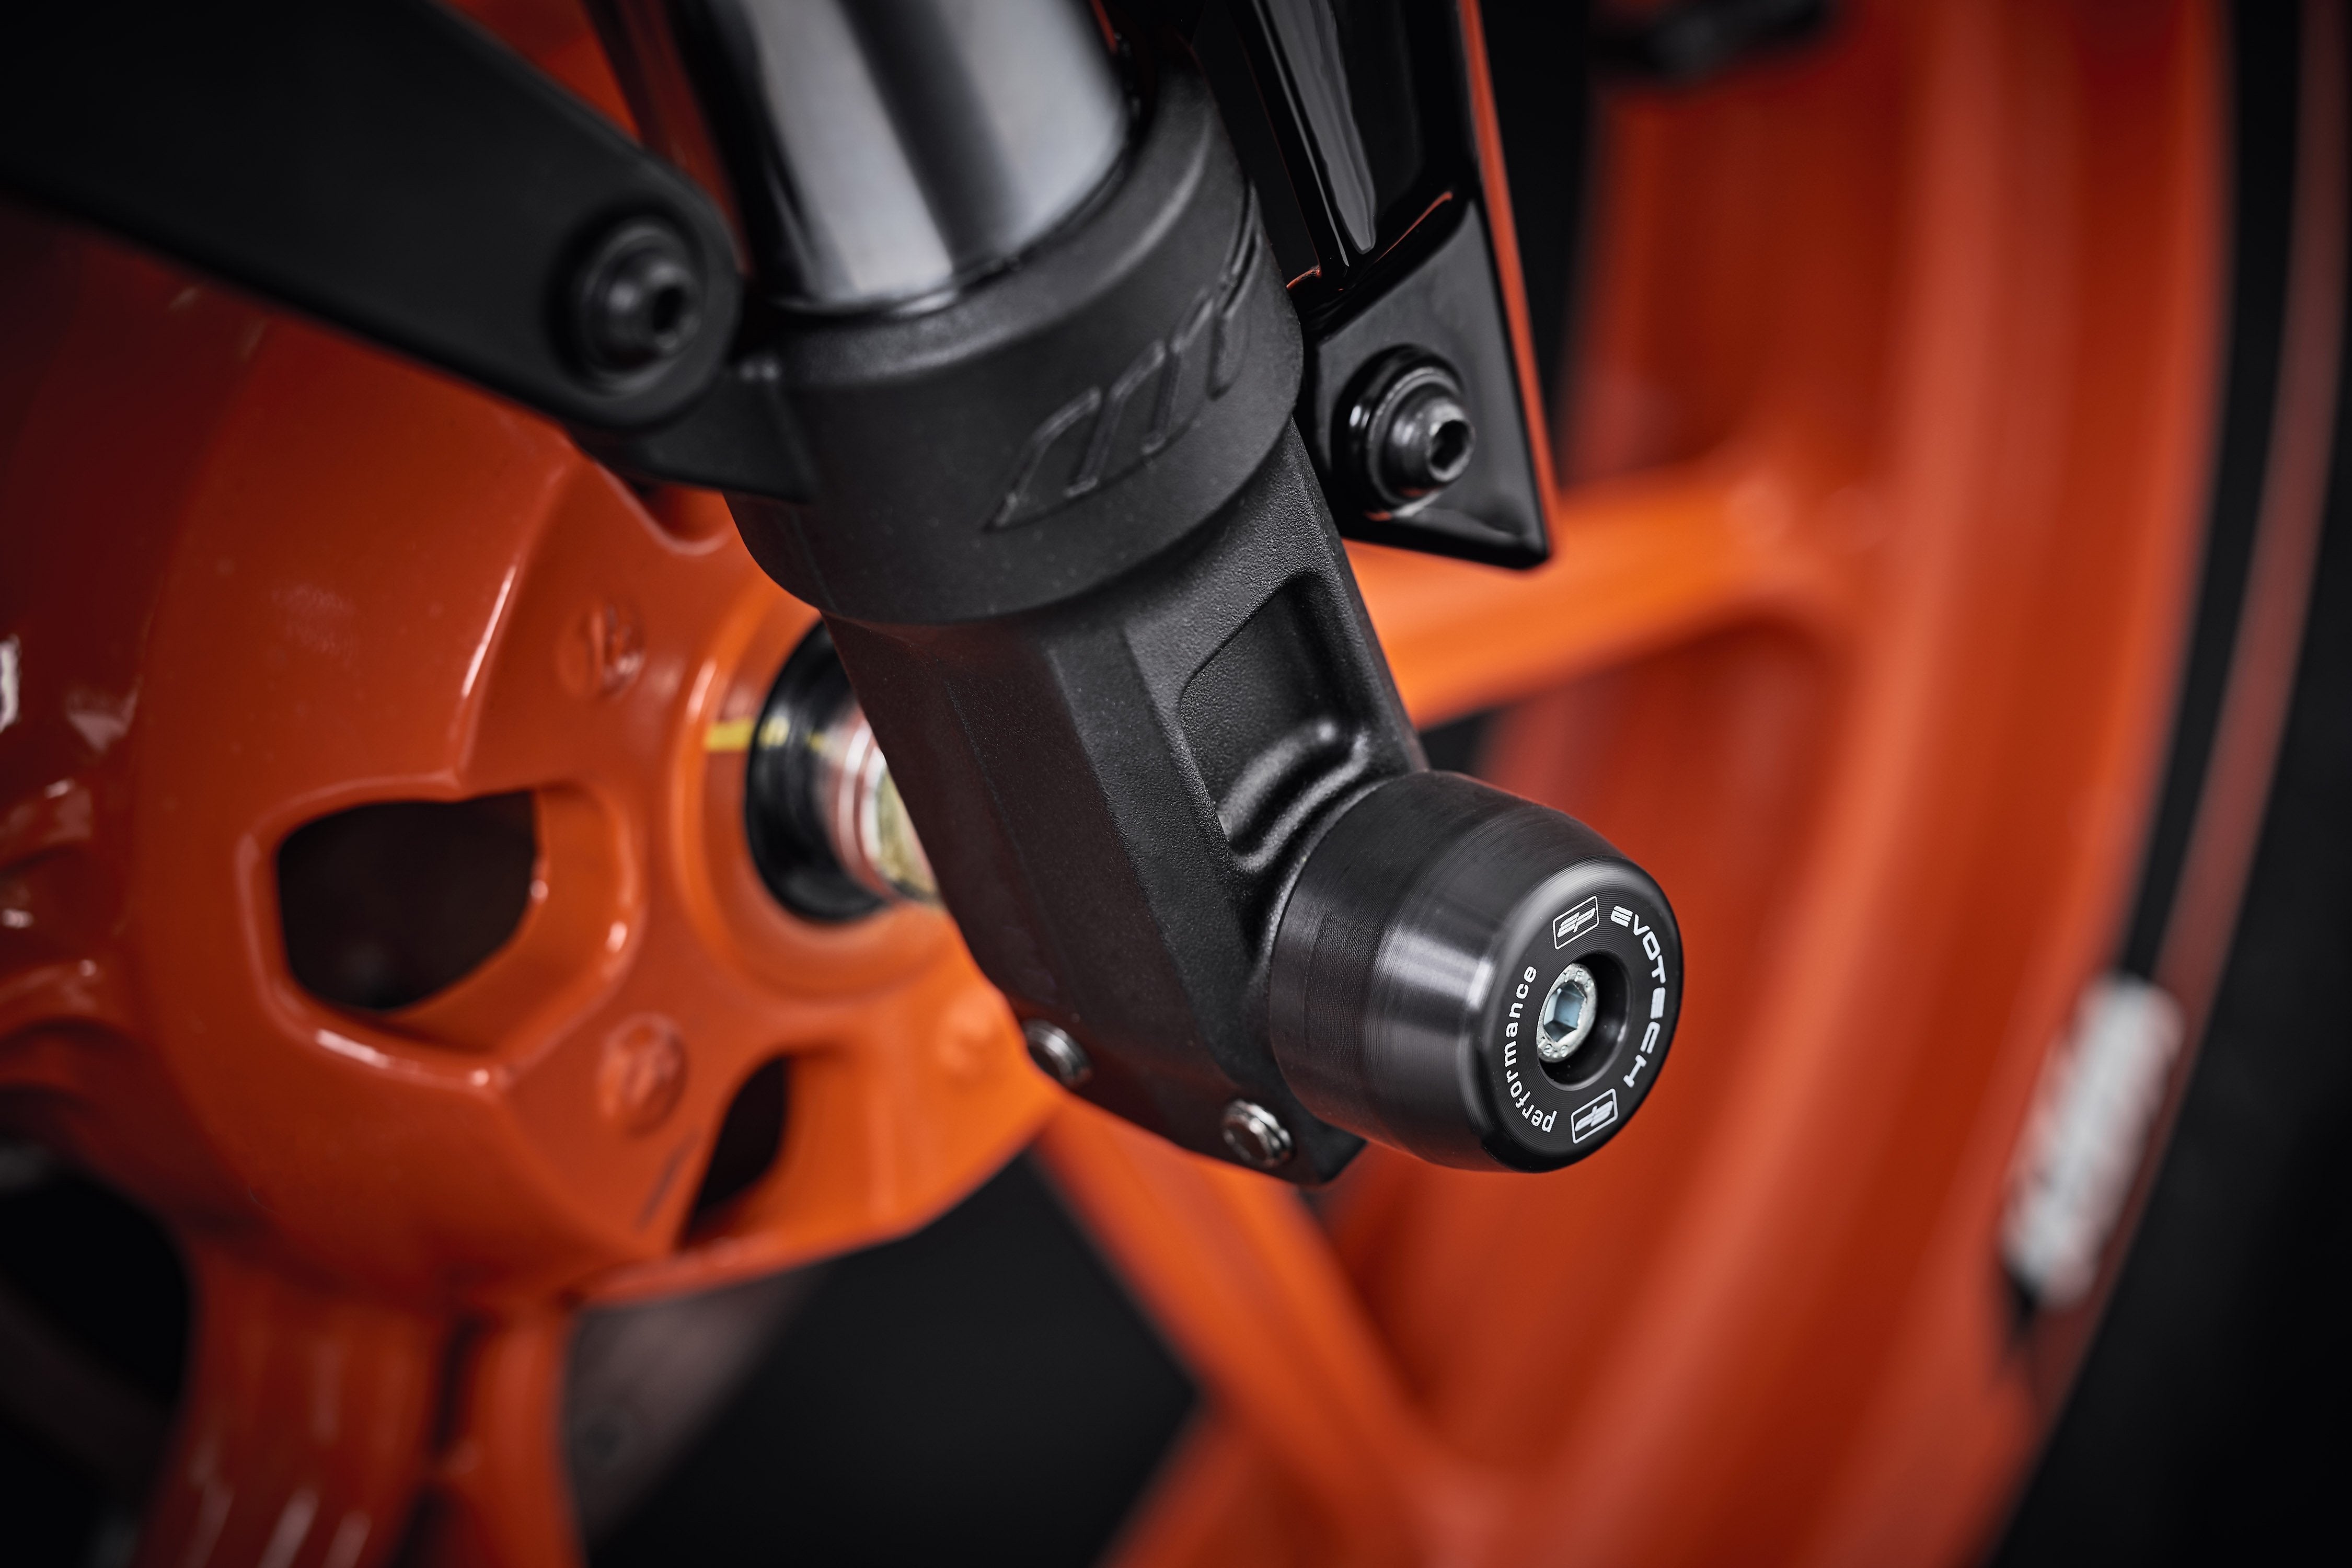 EP Front Spindle Bobbins for the KTM 390 Duke: Evotech Performanceâs crash protection bungs seamlessly fitted to the motorcycleâs front forks.